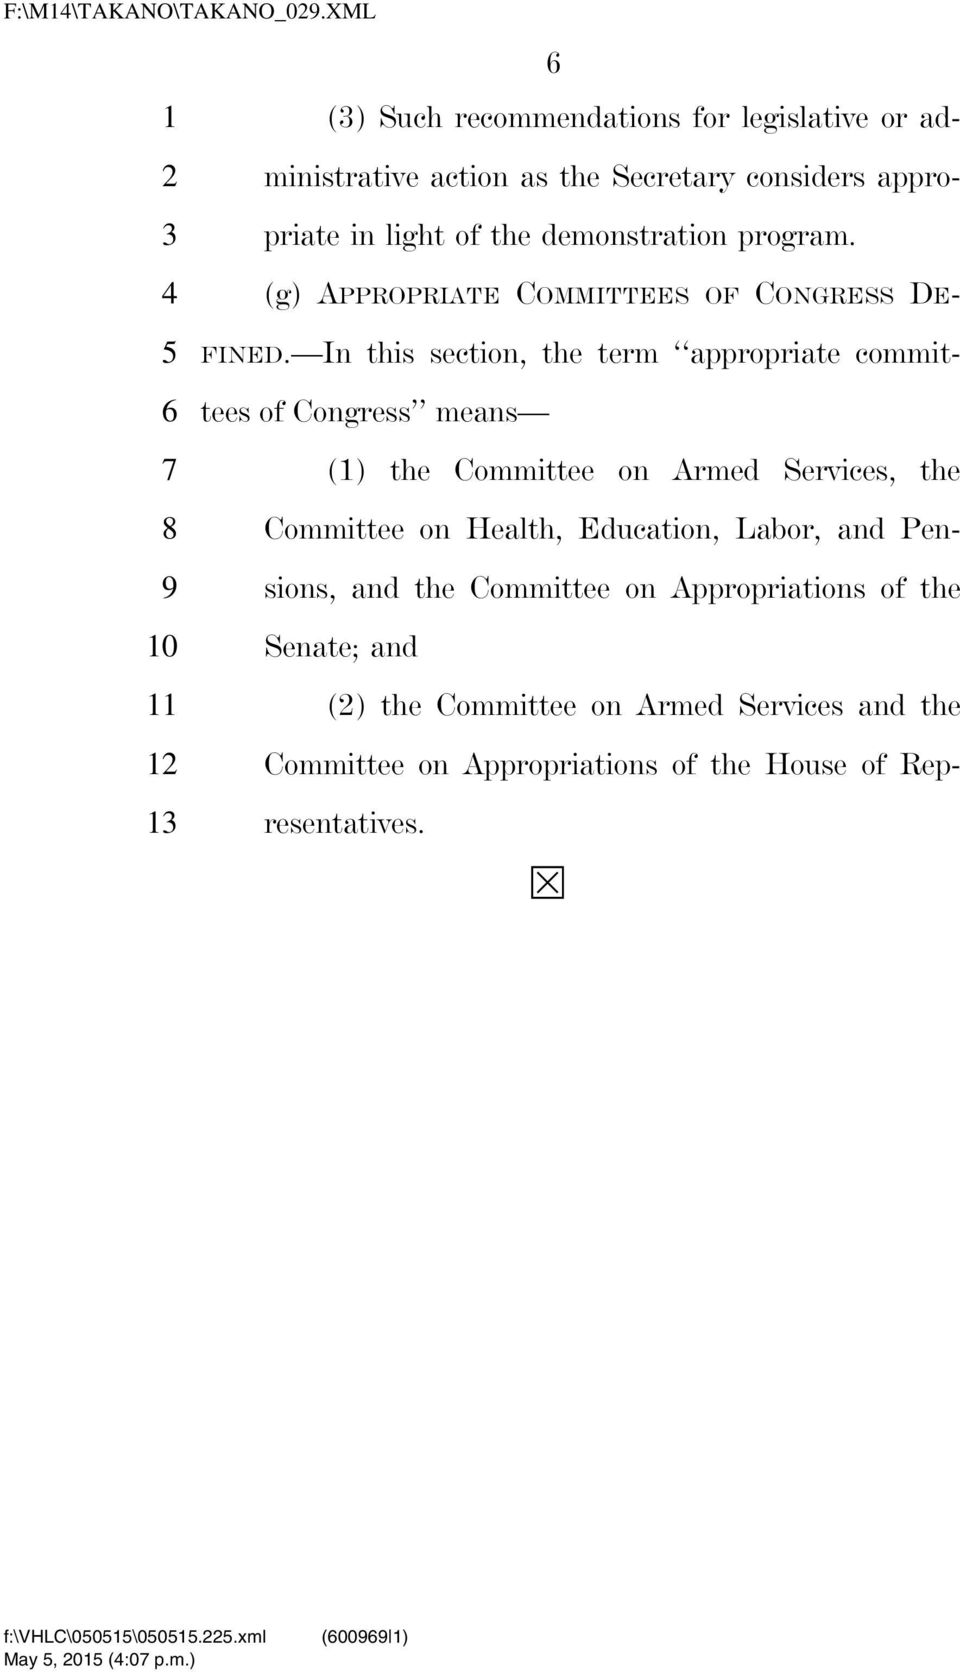 In this section, the term appropriate committees of Congress means () the Committee on Armed Services, the Committee on Health, Education, Labor, and Pensions, and the Committee